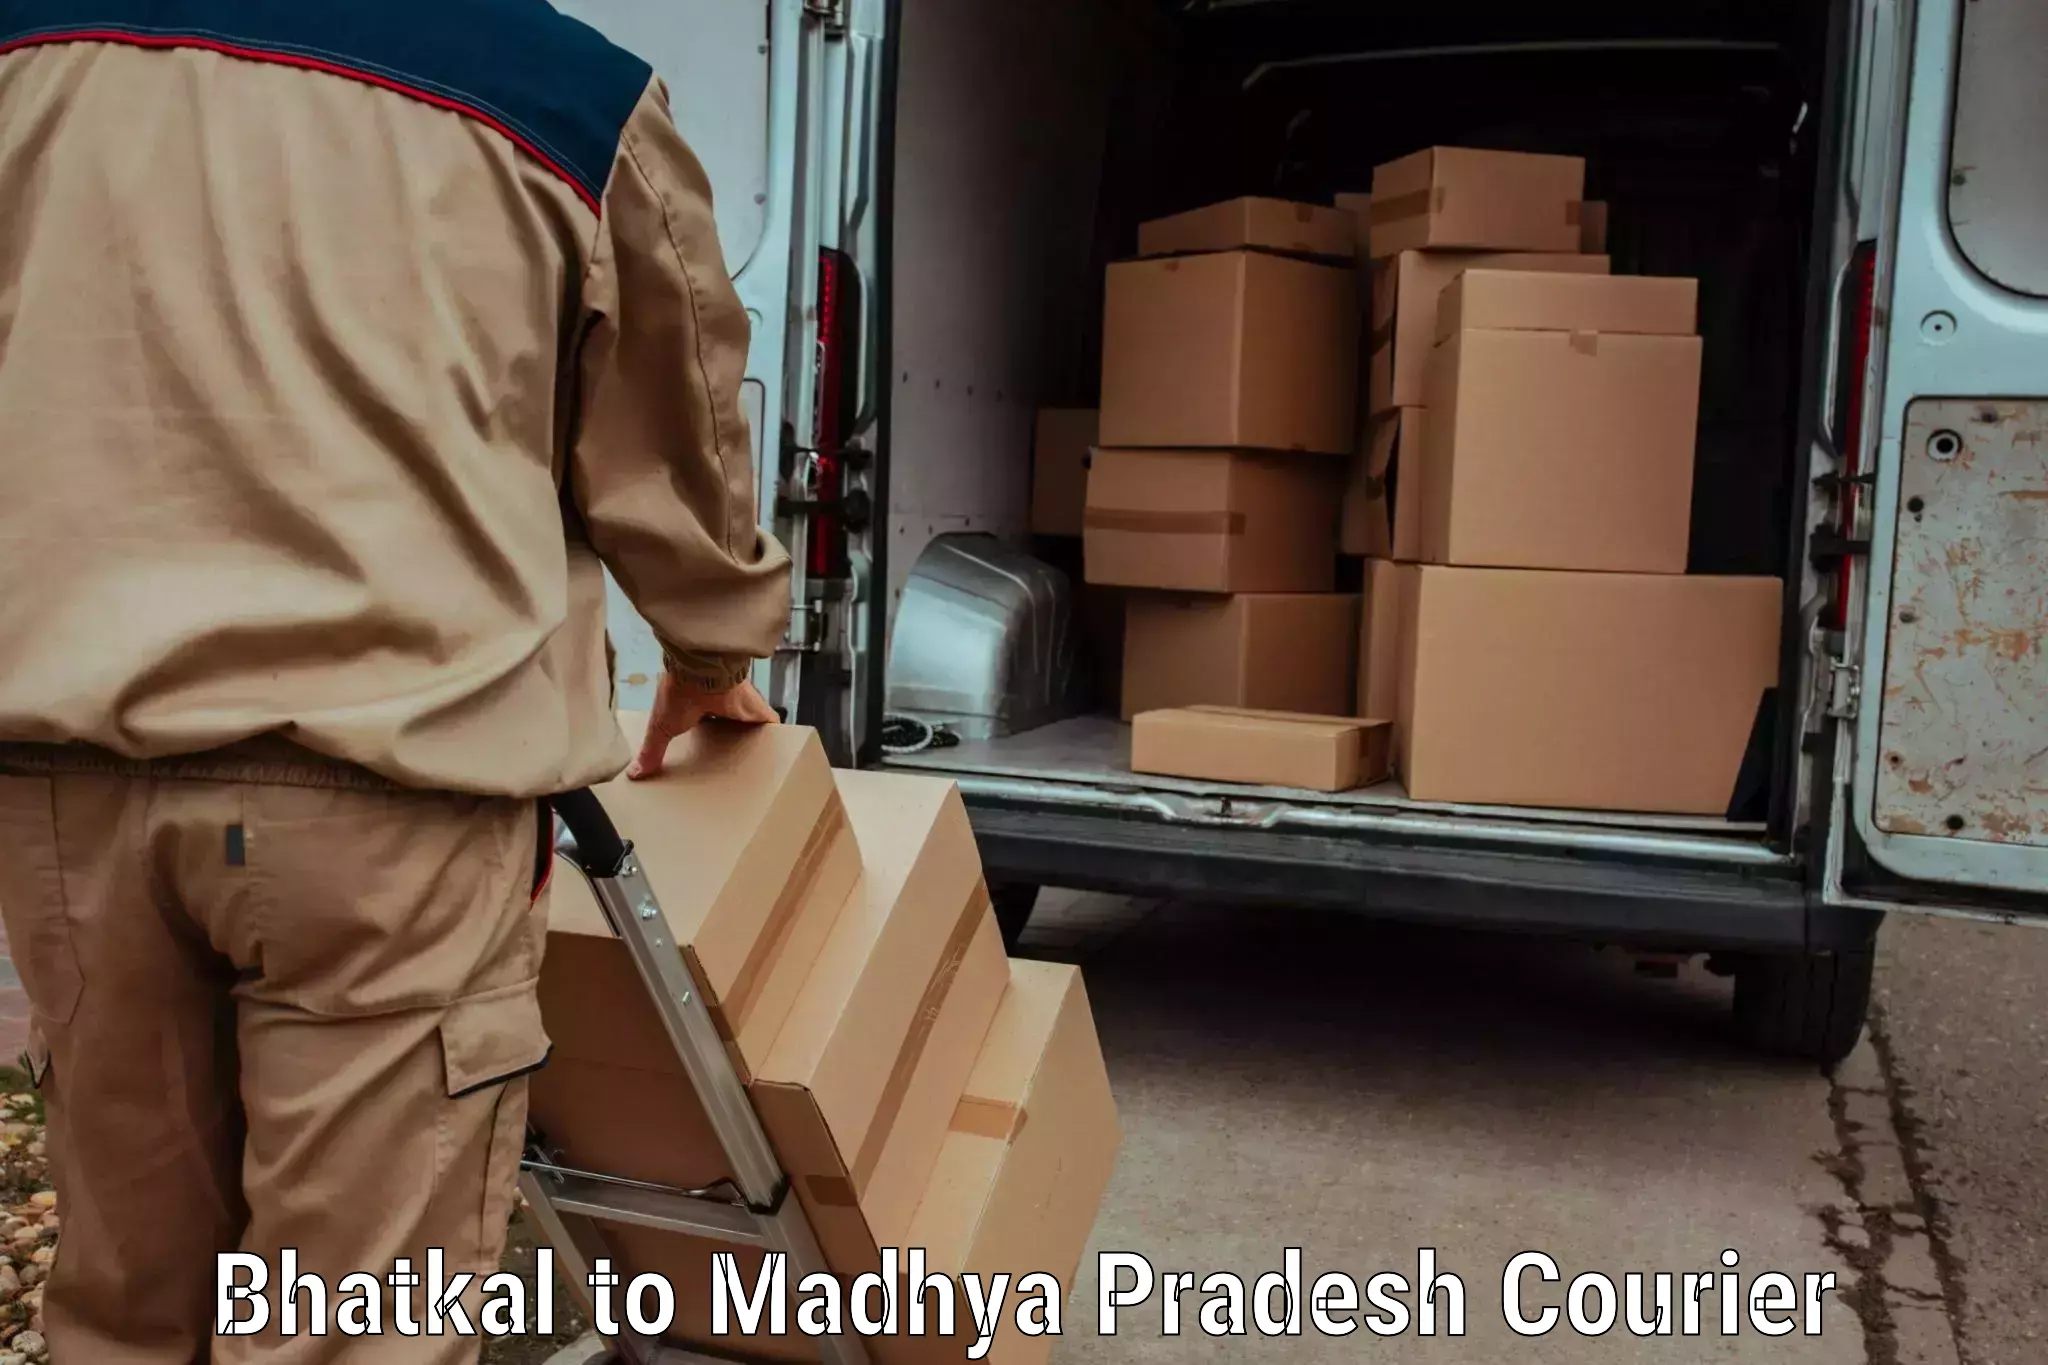 Multi-national courier services Bhatkal to Ujjain